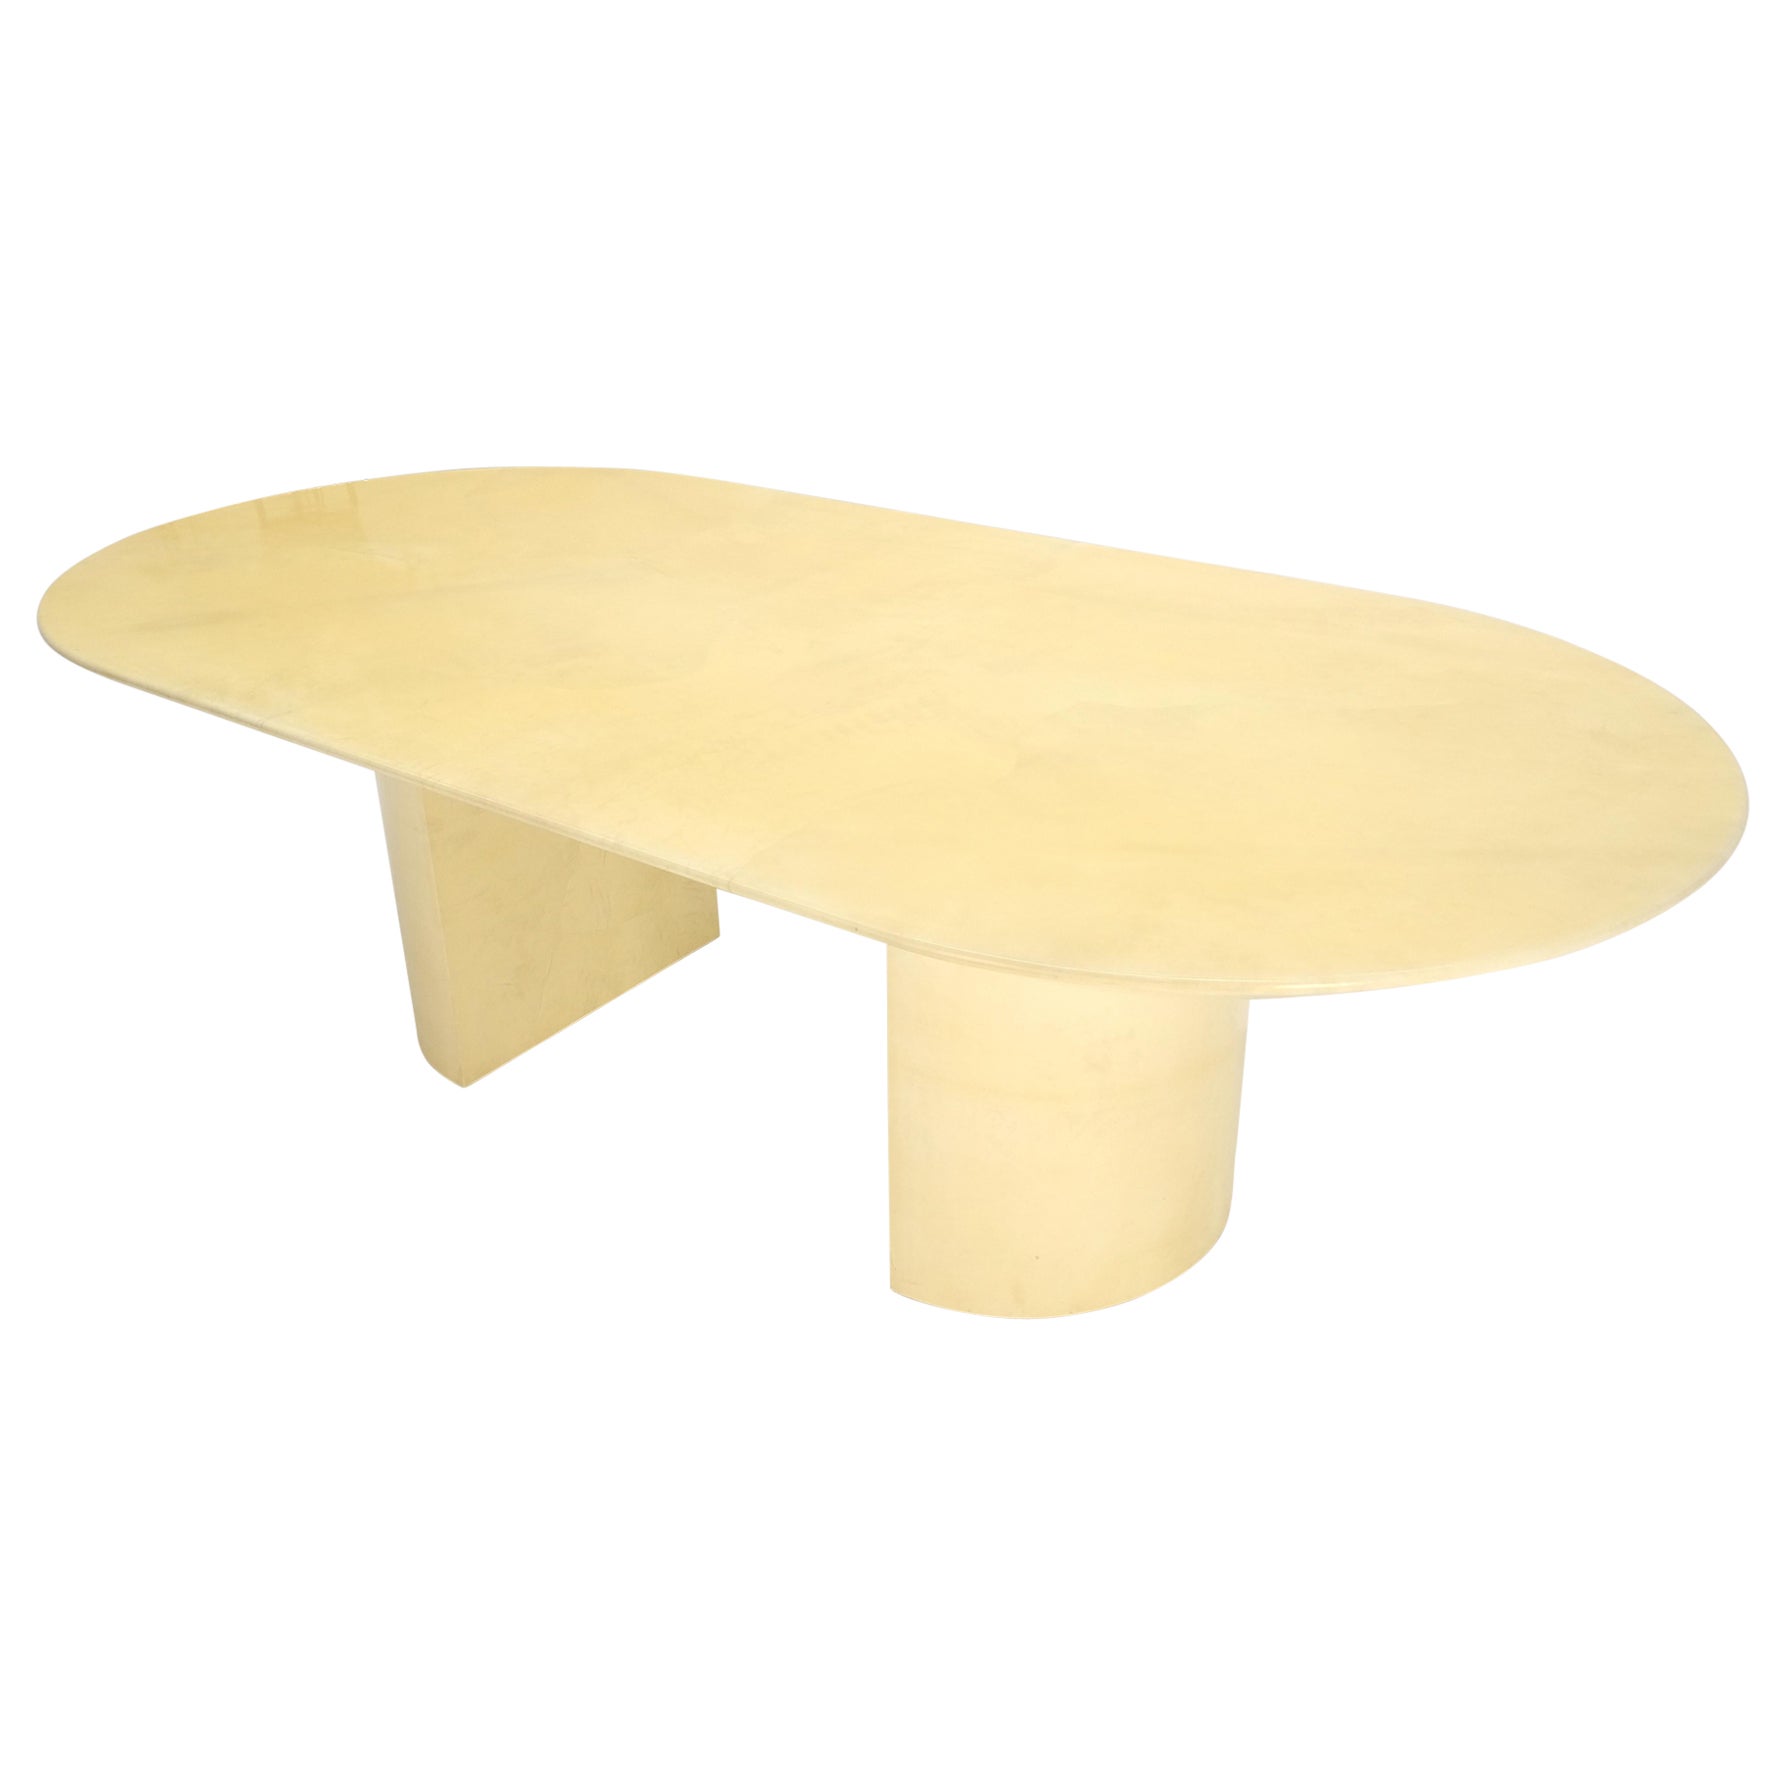 Large Oval Racetrack Knife Edge Lacquered Parchment Goat Skin Dining Table MINT  For Sale